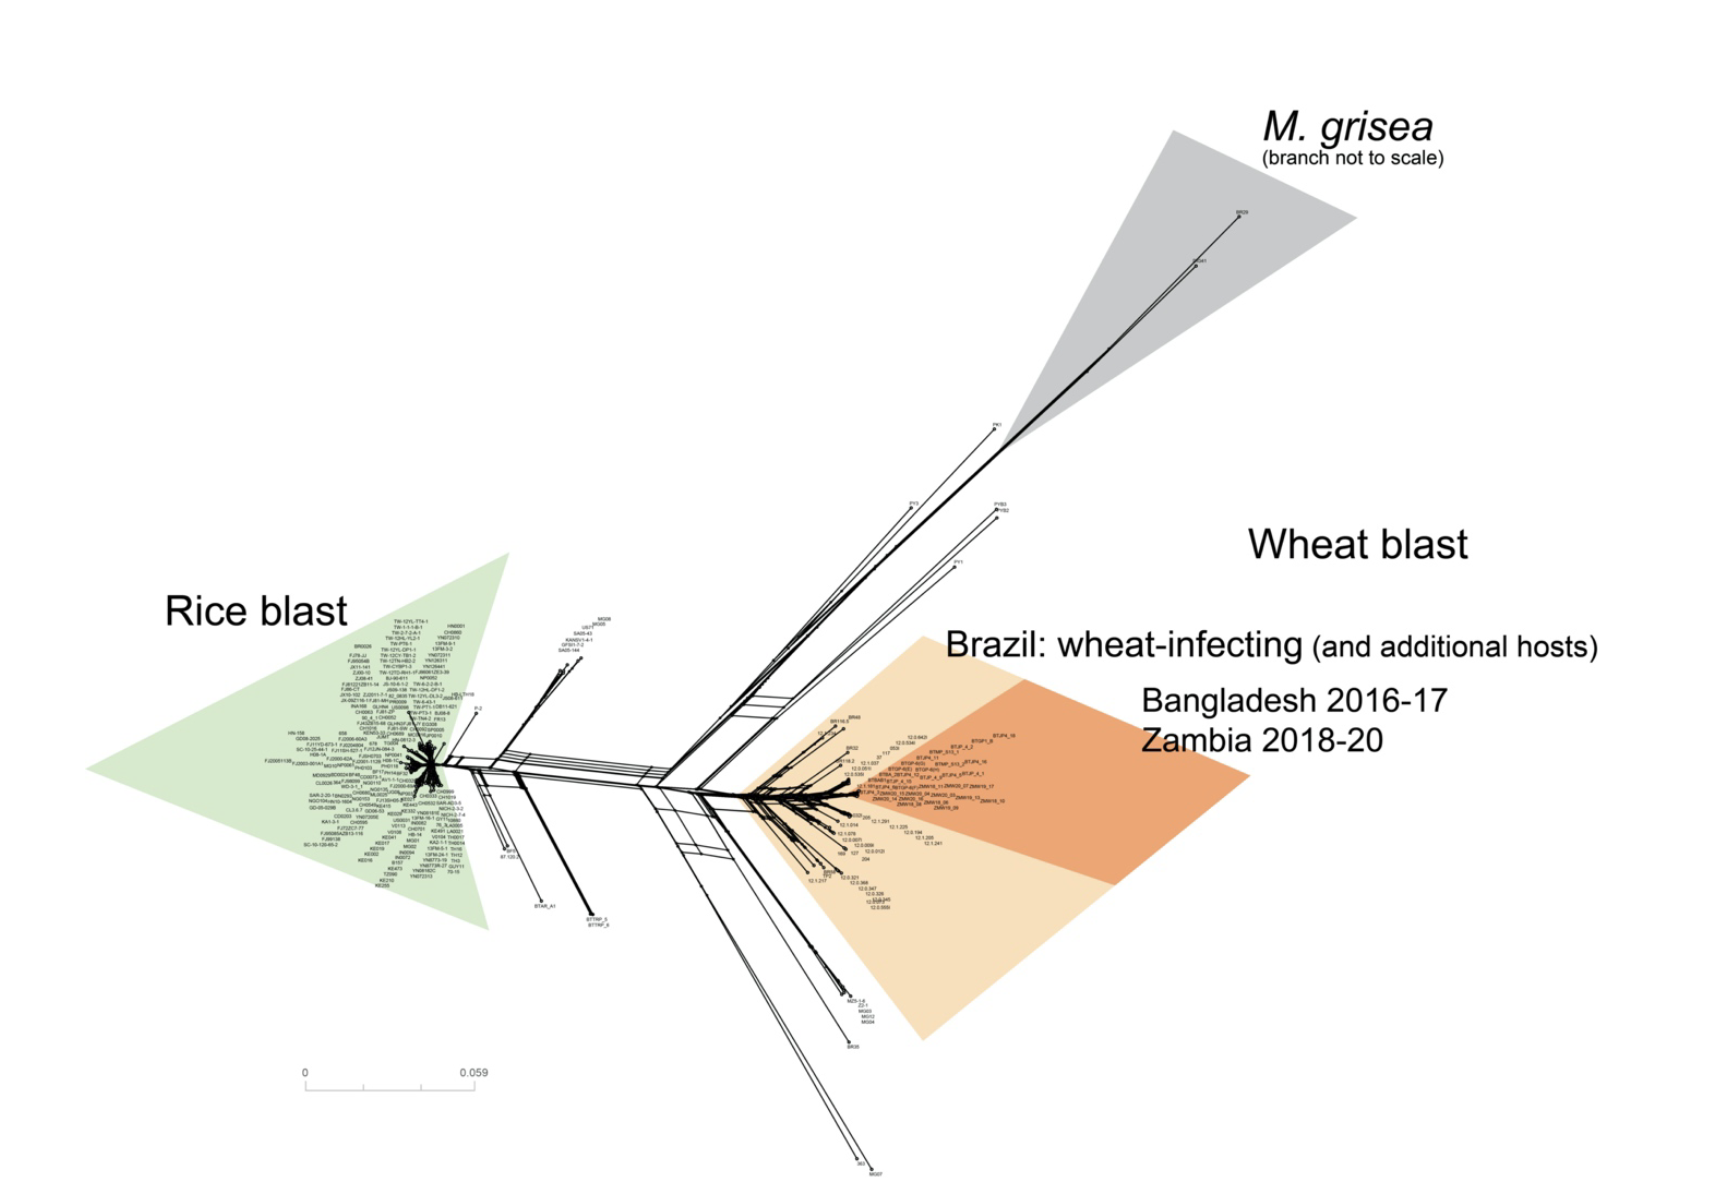 Whole-genome analyses of 286 Magnaporthe oryzae genomes suggest that an independent introduction of a global pandemic lineage is at the origin of the Zambia wheat blast outbreak